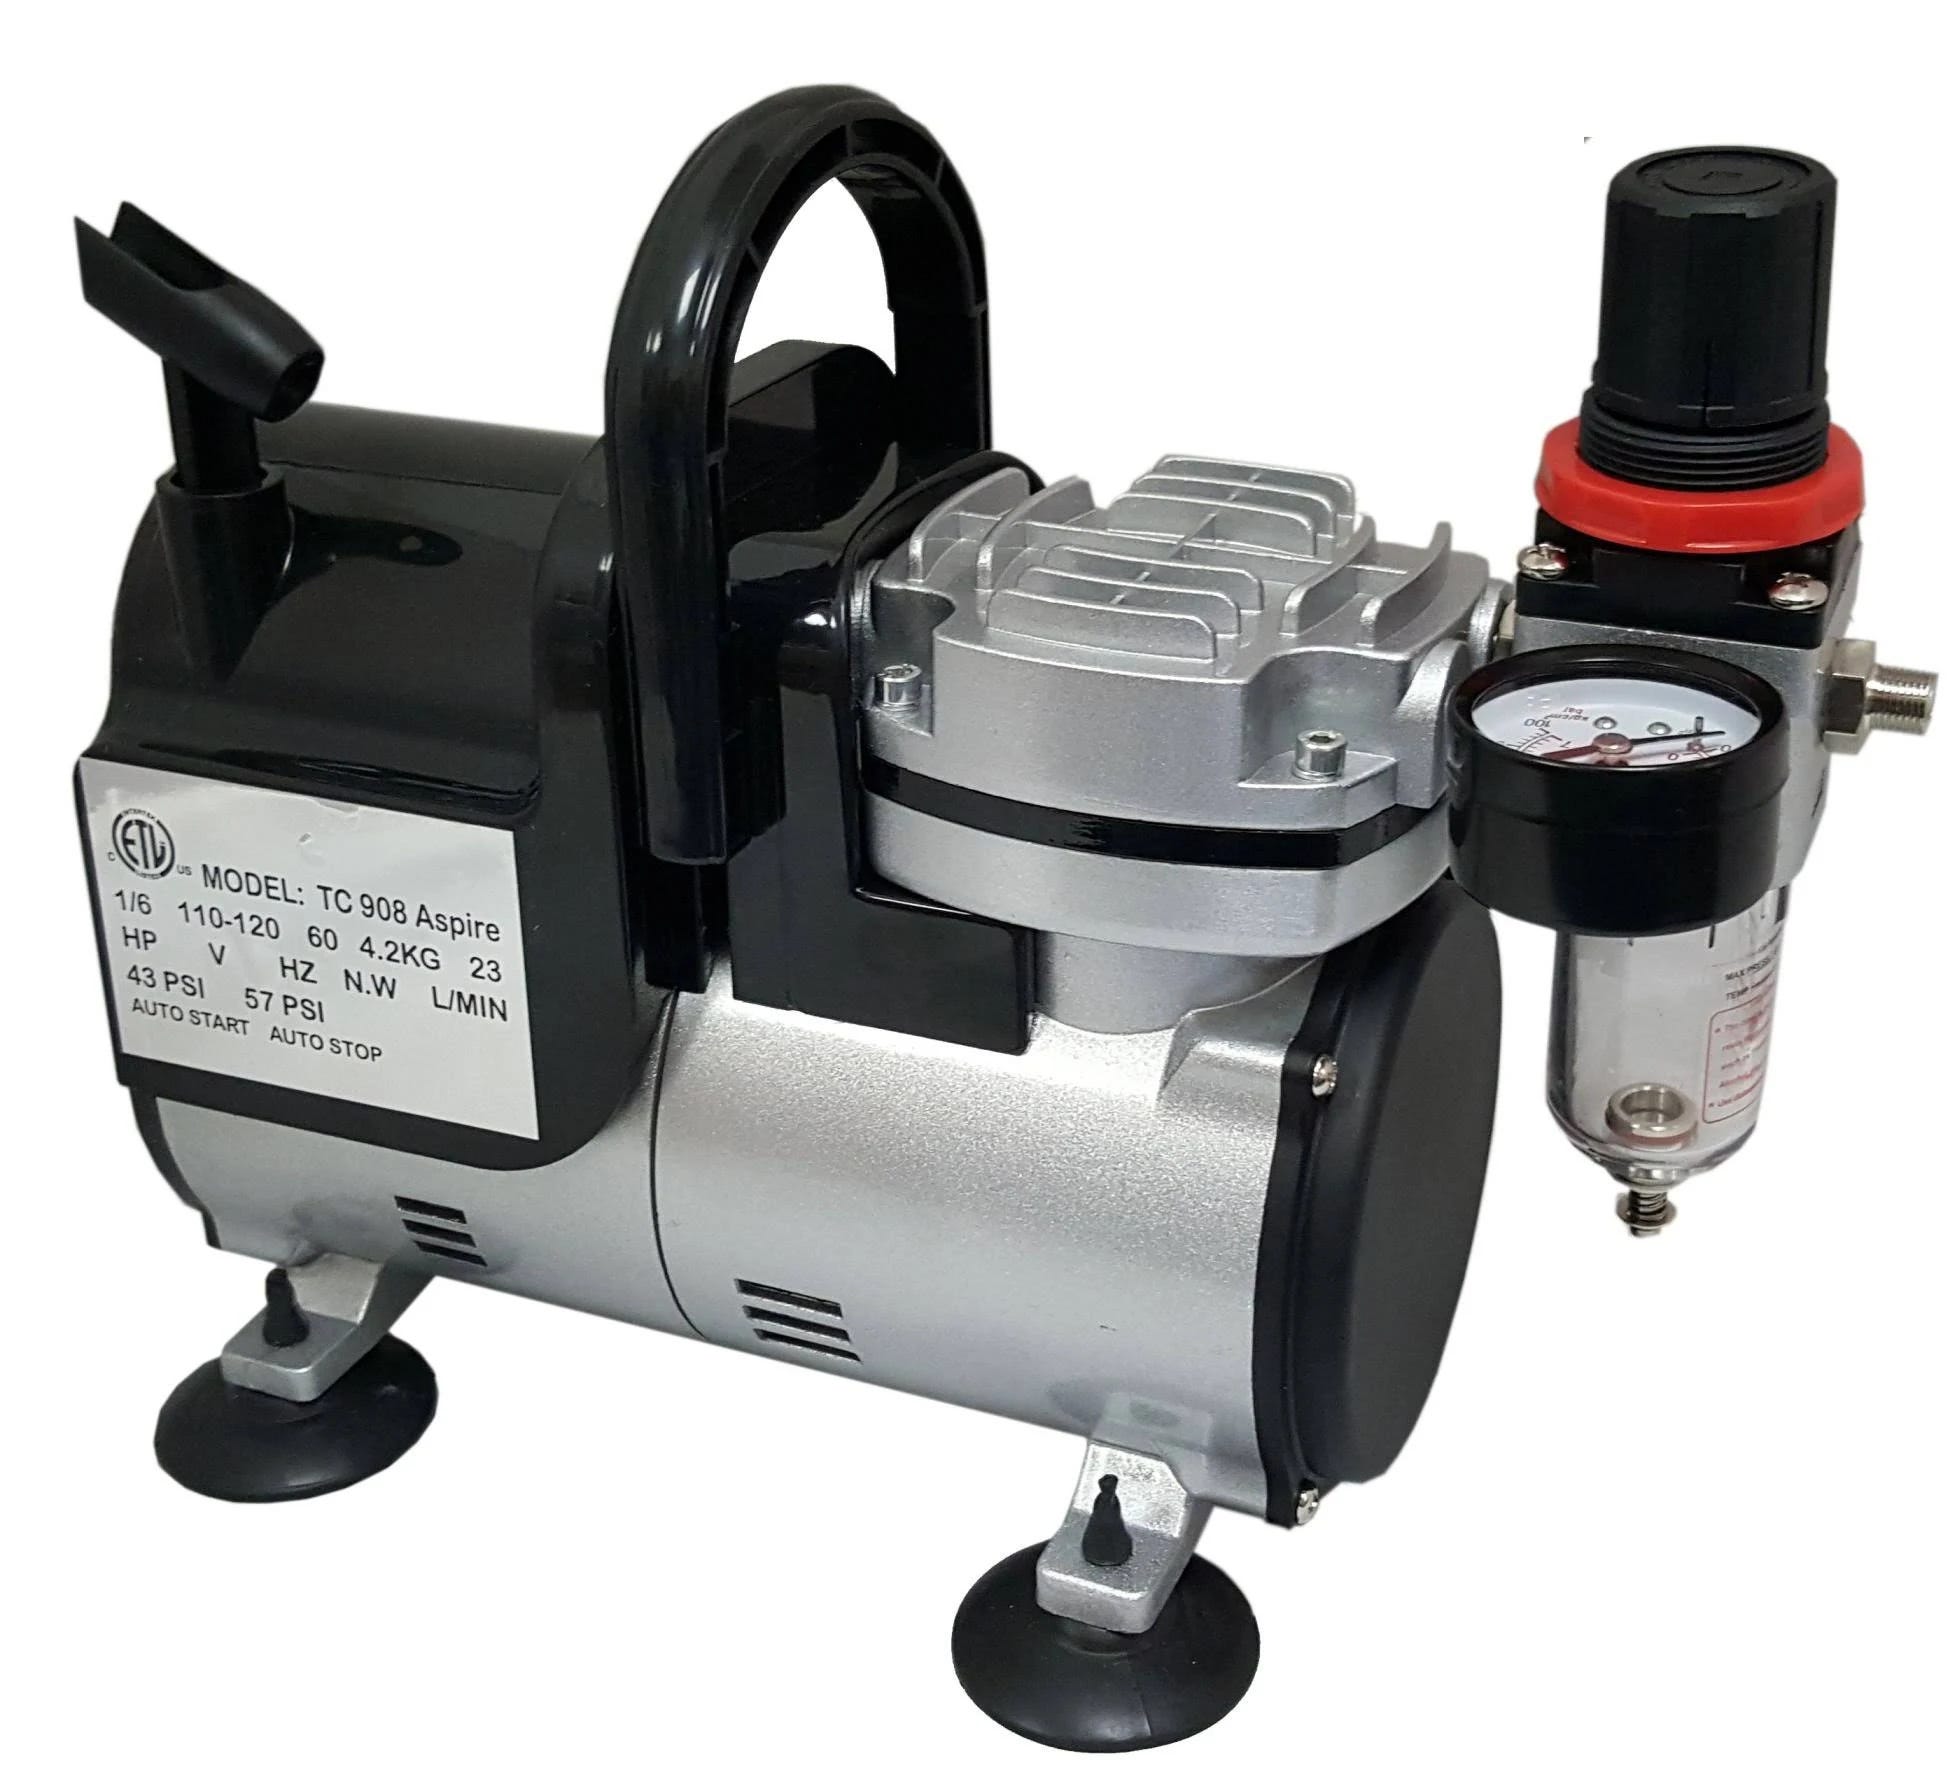 Quiet and Portable Airbrush Compressor with Built-in Moisture Filter and Adjustable Pressure | Image